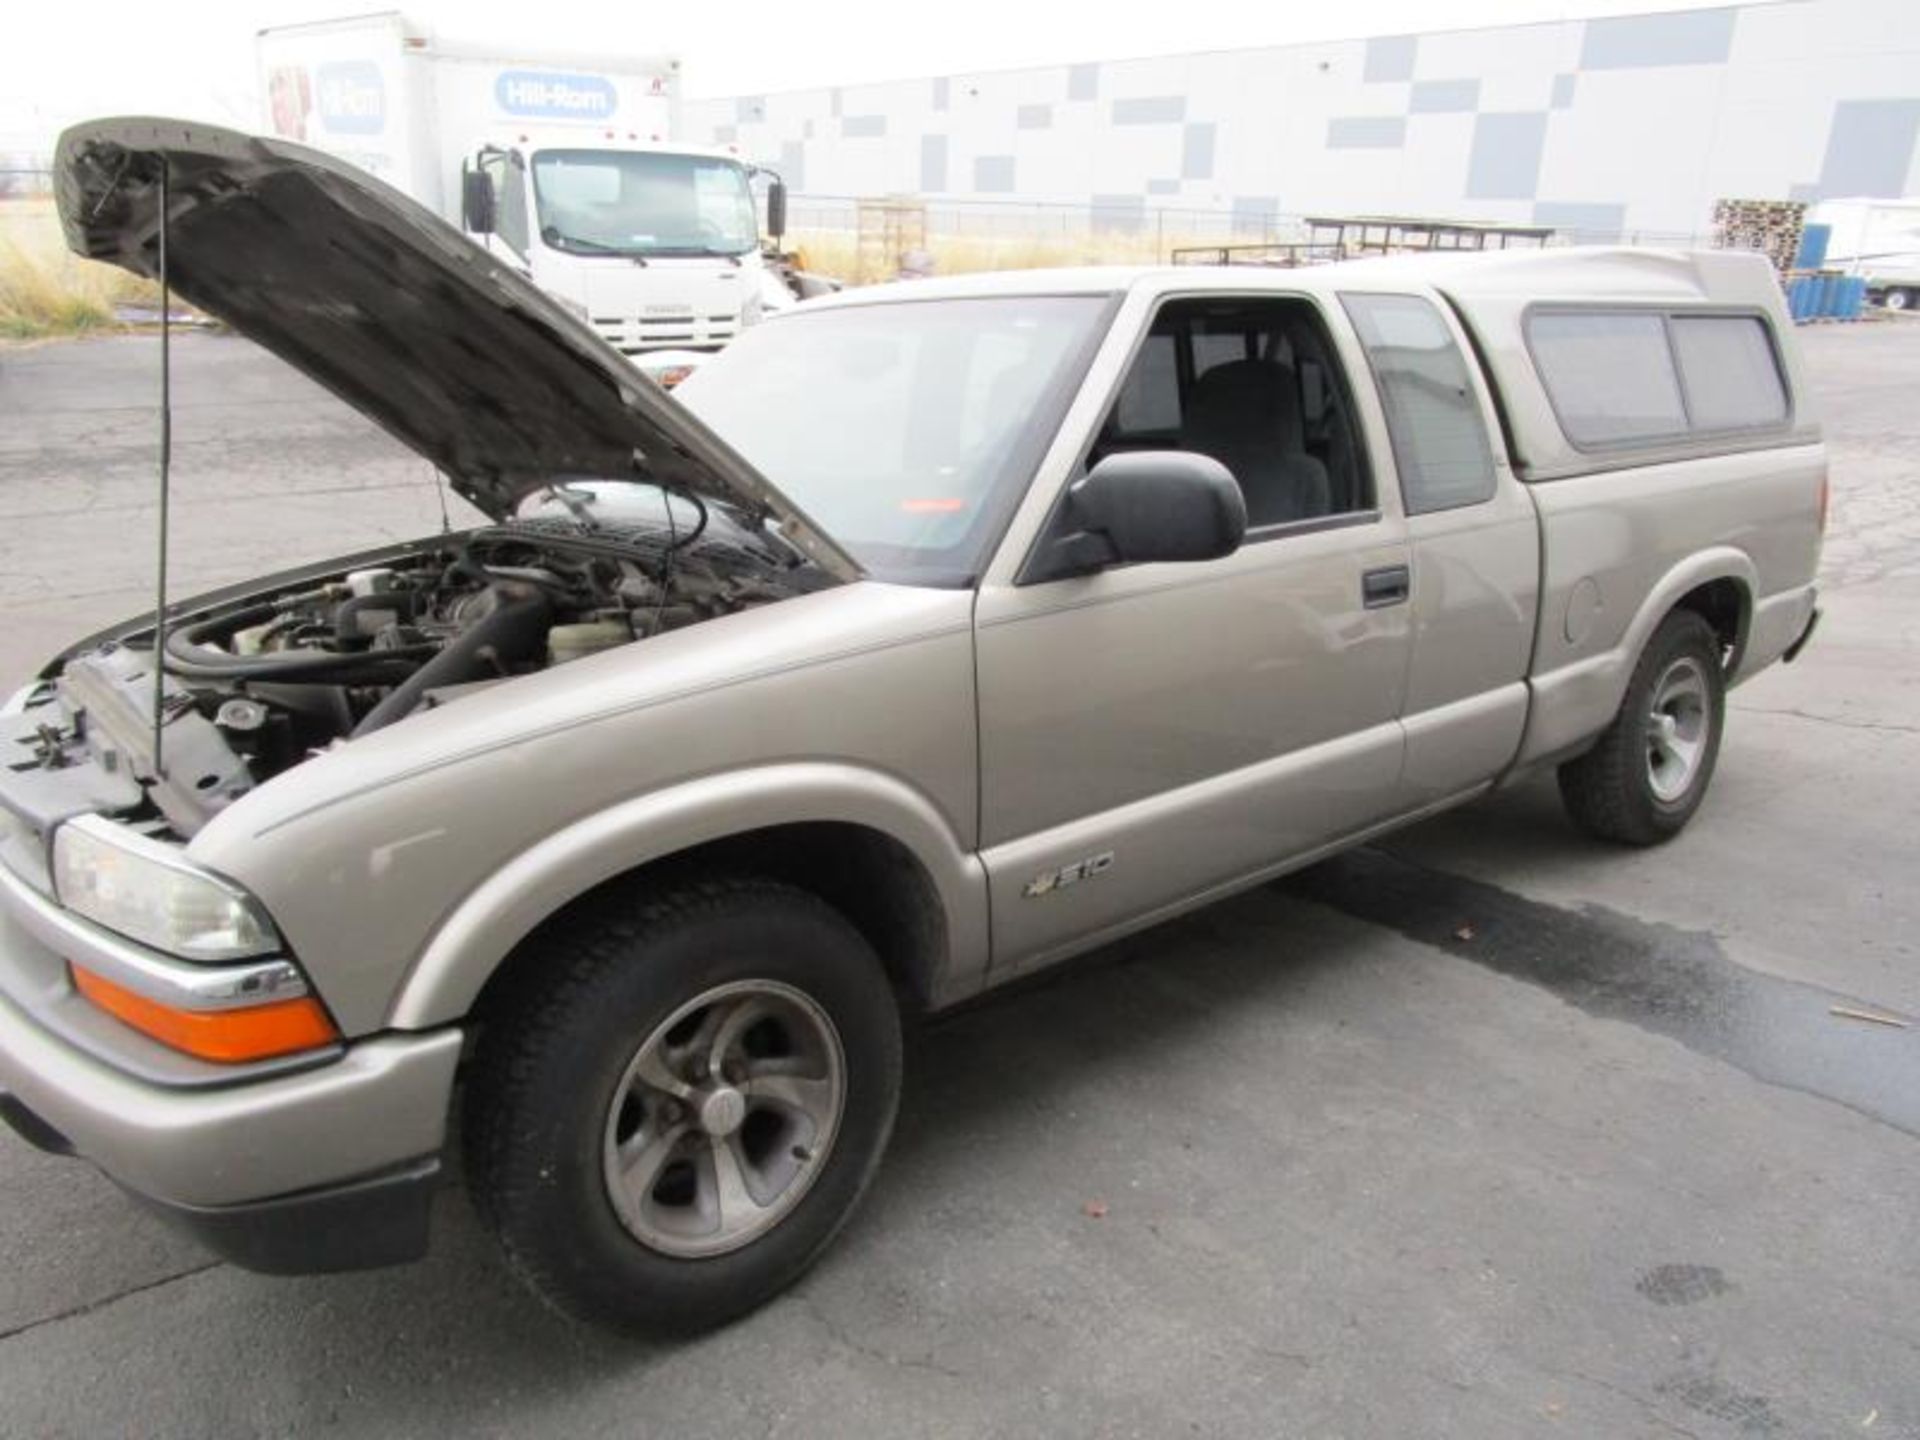 1998 Chevrolet S10 2wd Pickup, Vin: 1GCCS1947W8224590, Battery Dead, Approx. 120,009 Miles. Some - Image 5 of 13